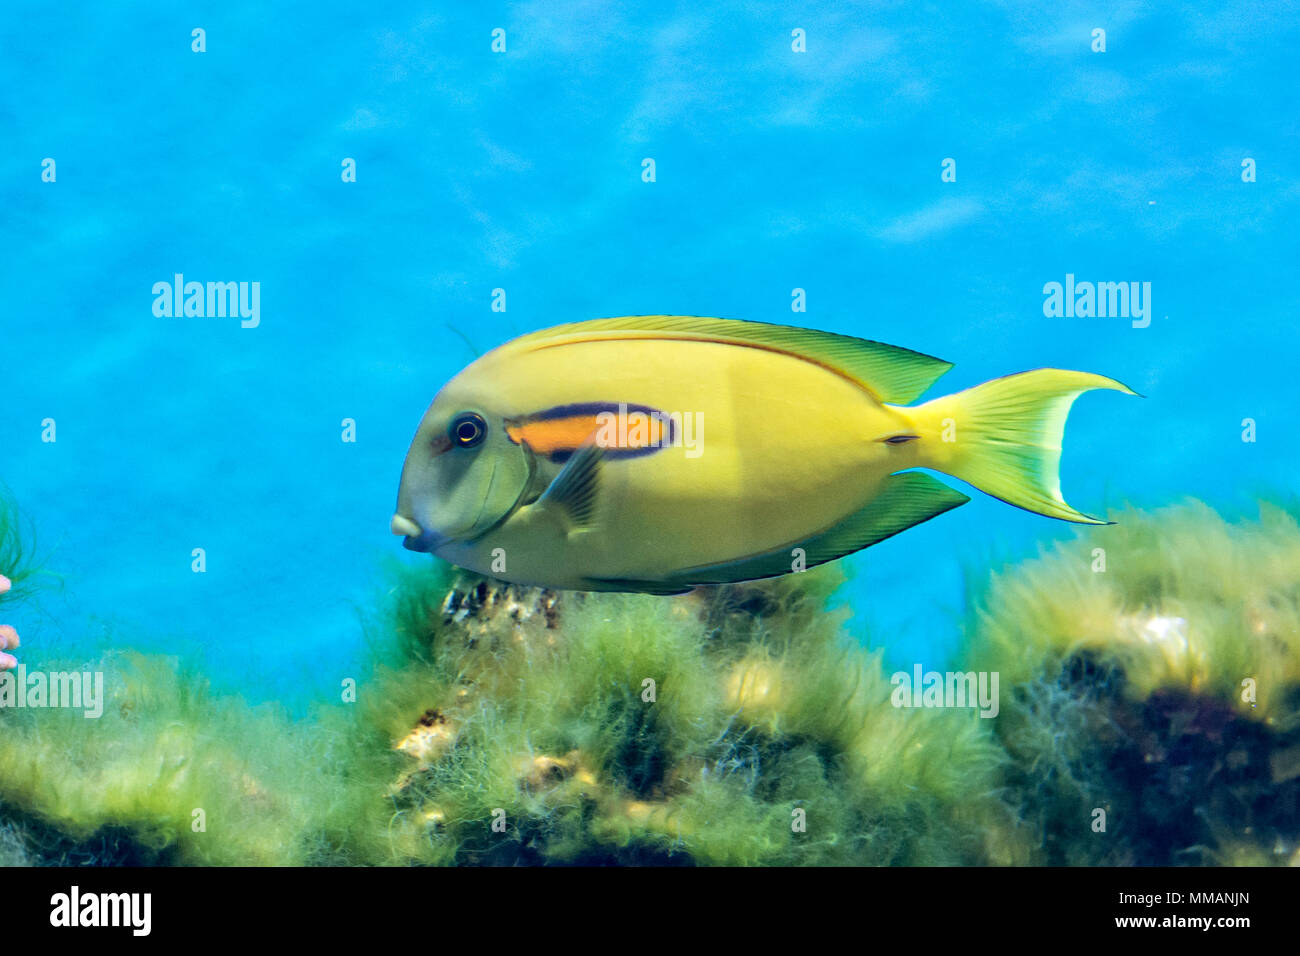 A bright yellow Orangepsot Surgeon fish swimming at a coral reef. Stock Photo